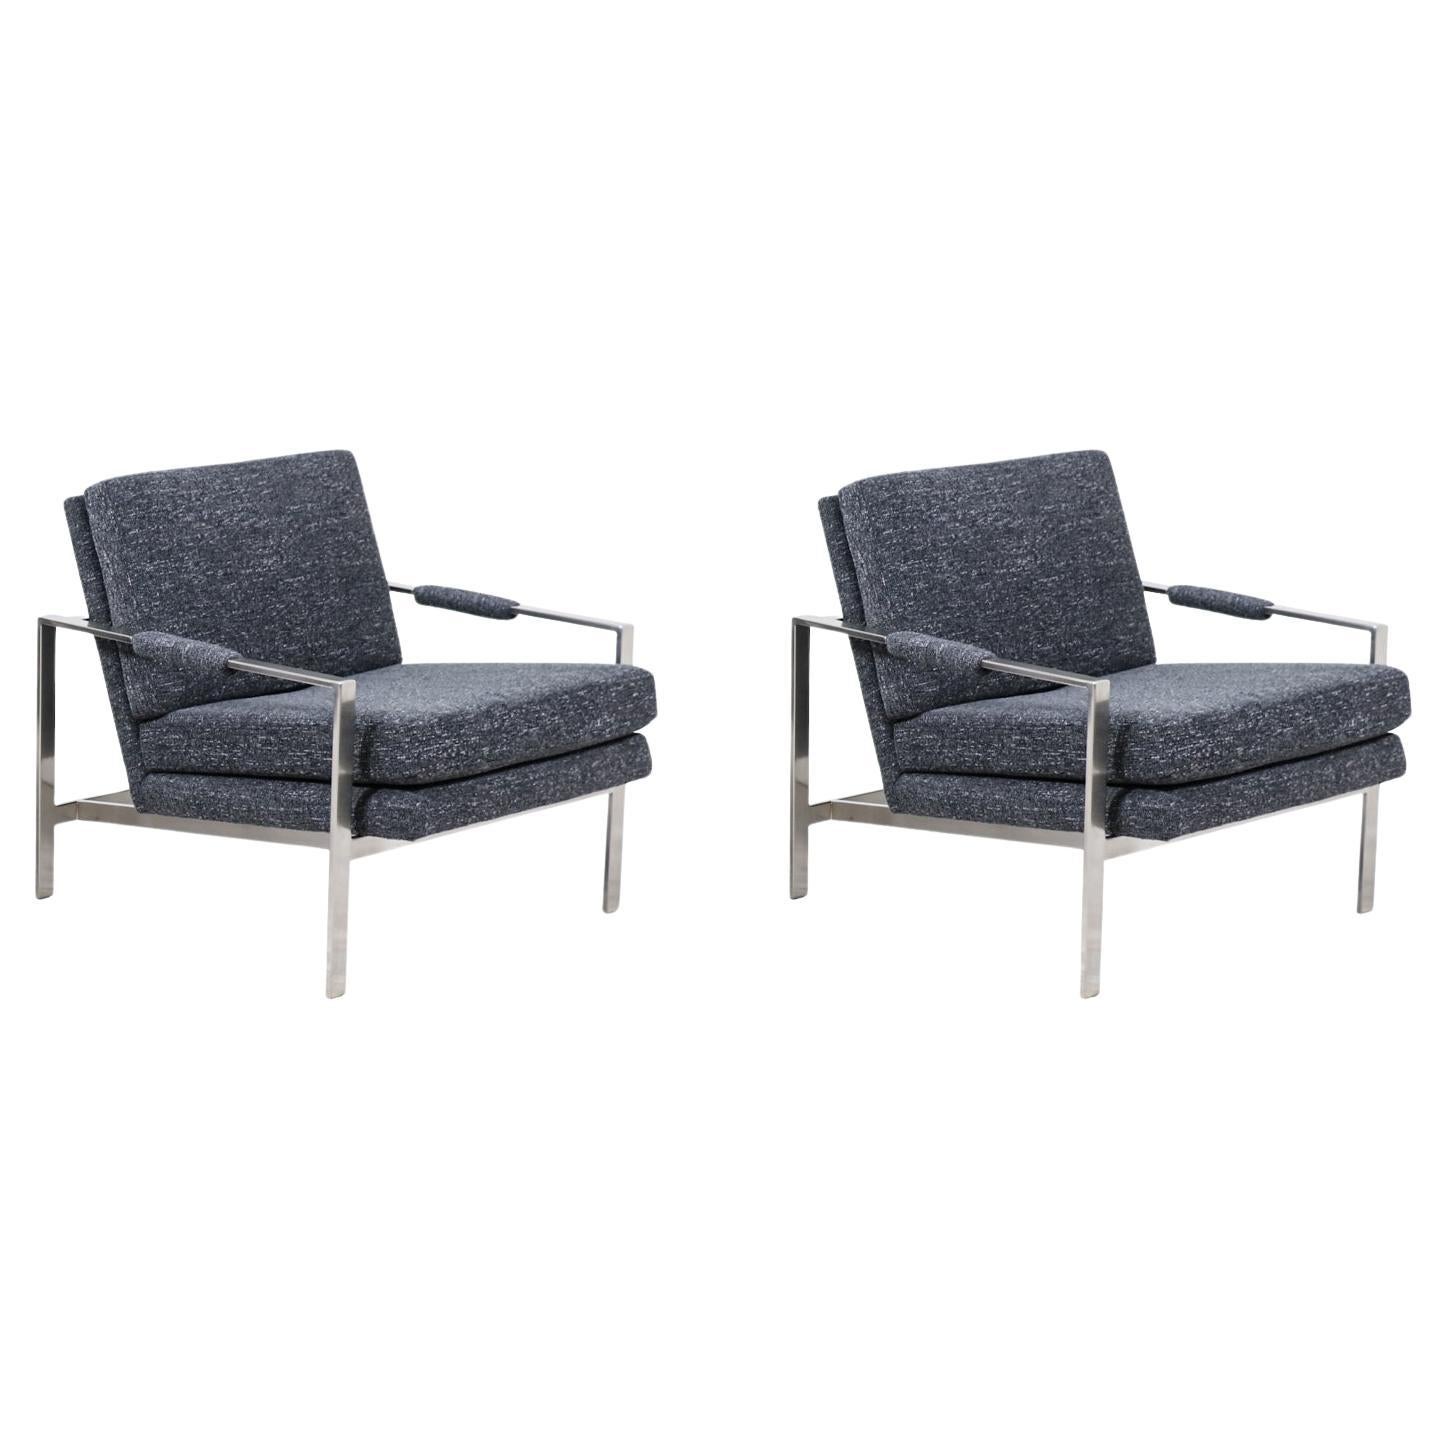  Expertly Restored - Milo Baughman Steel Lounge Chairs for Thayer Coggin